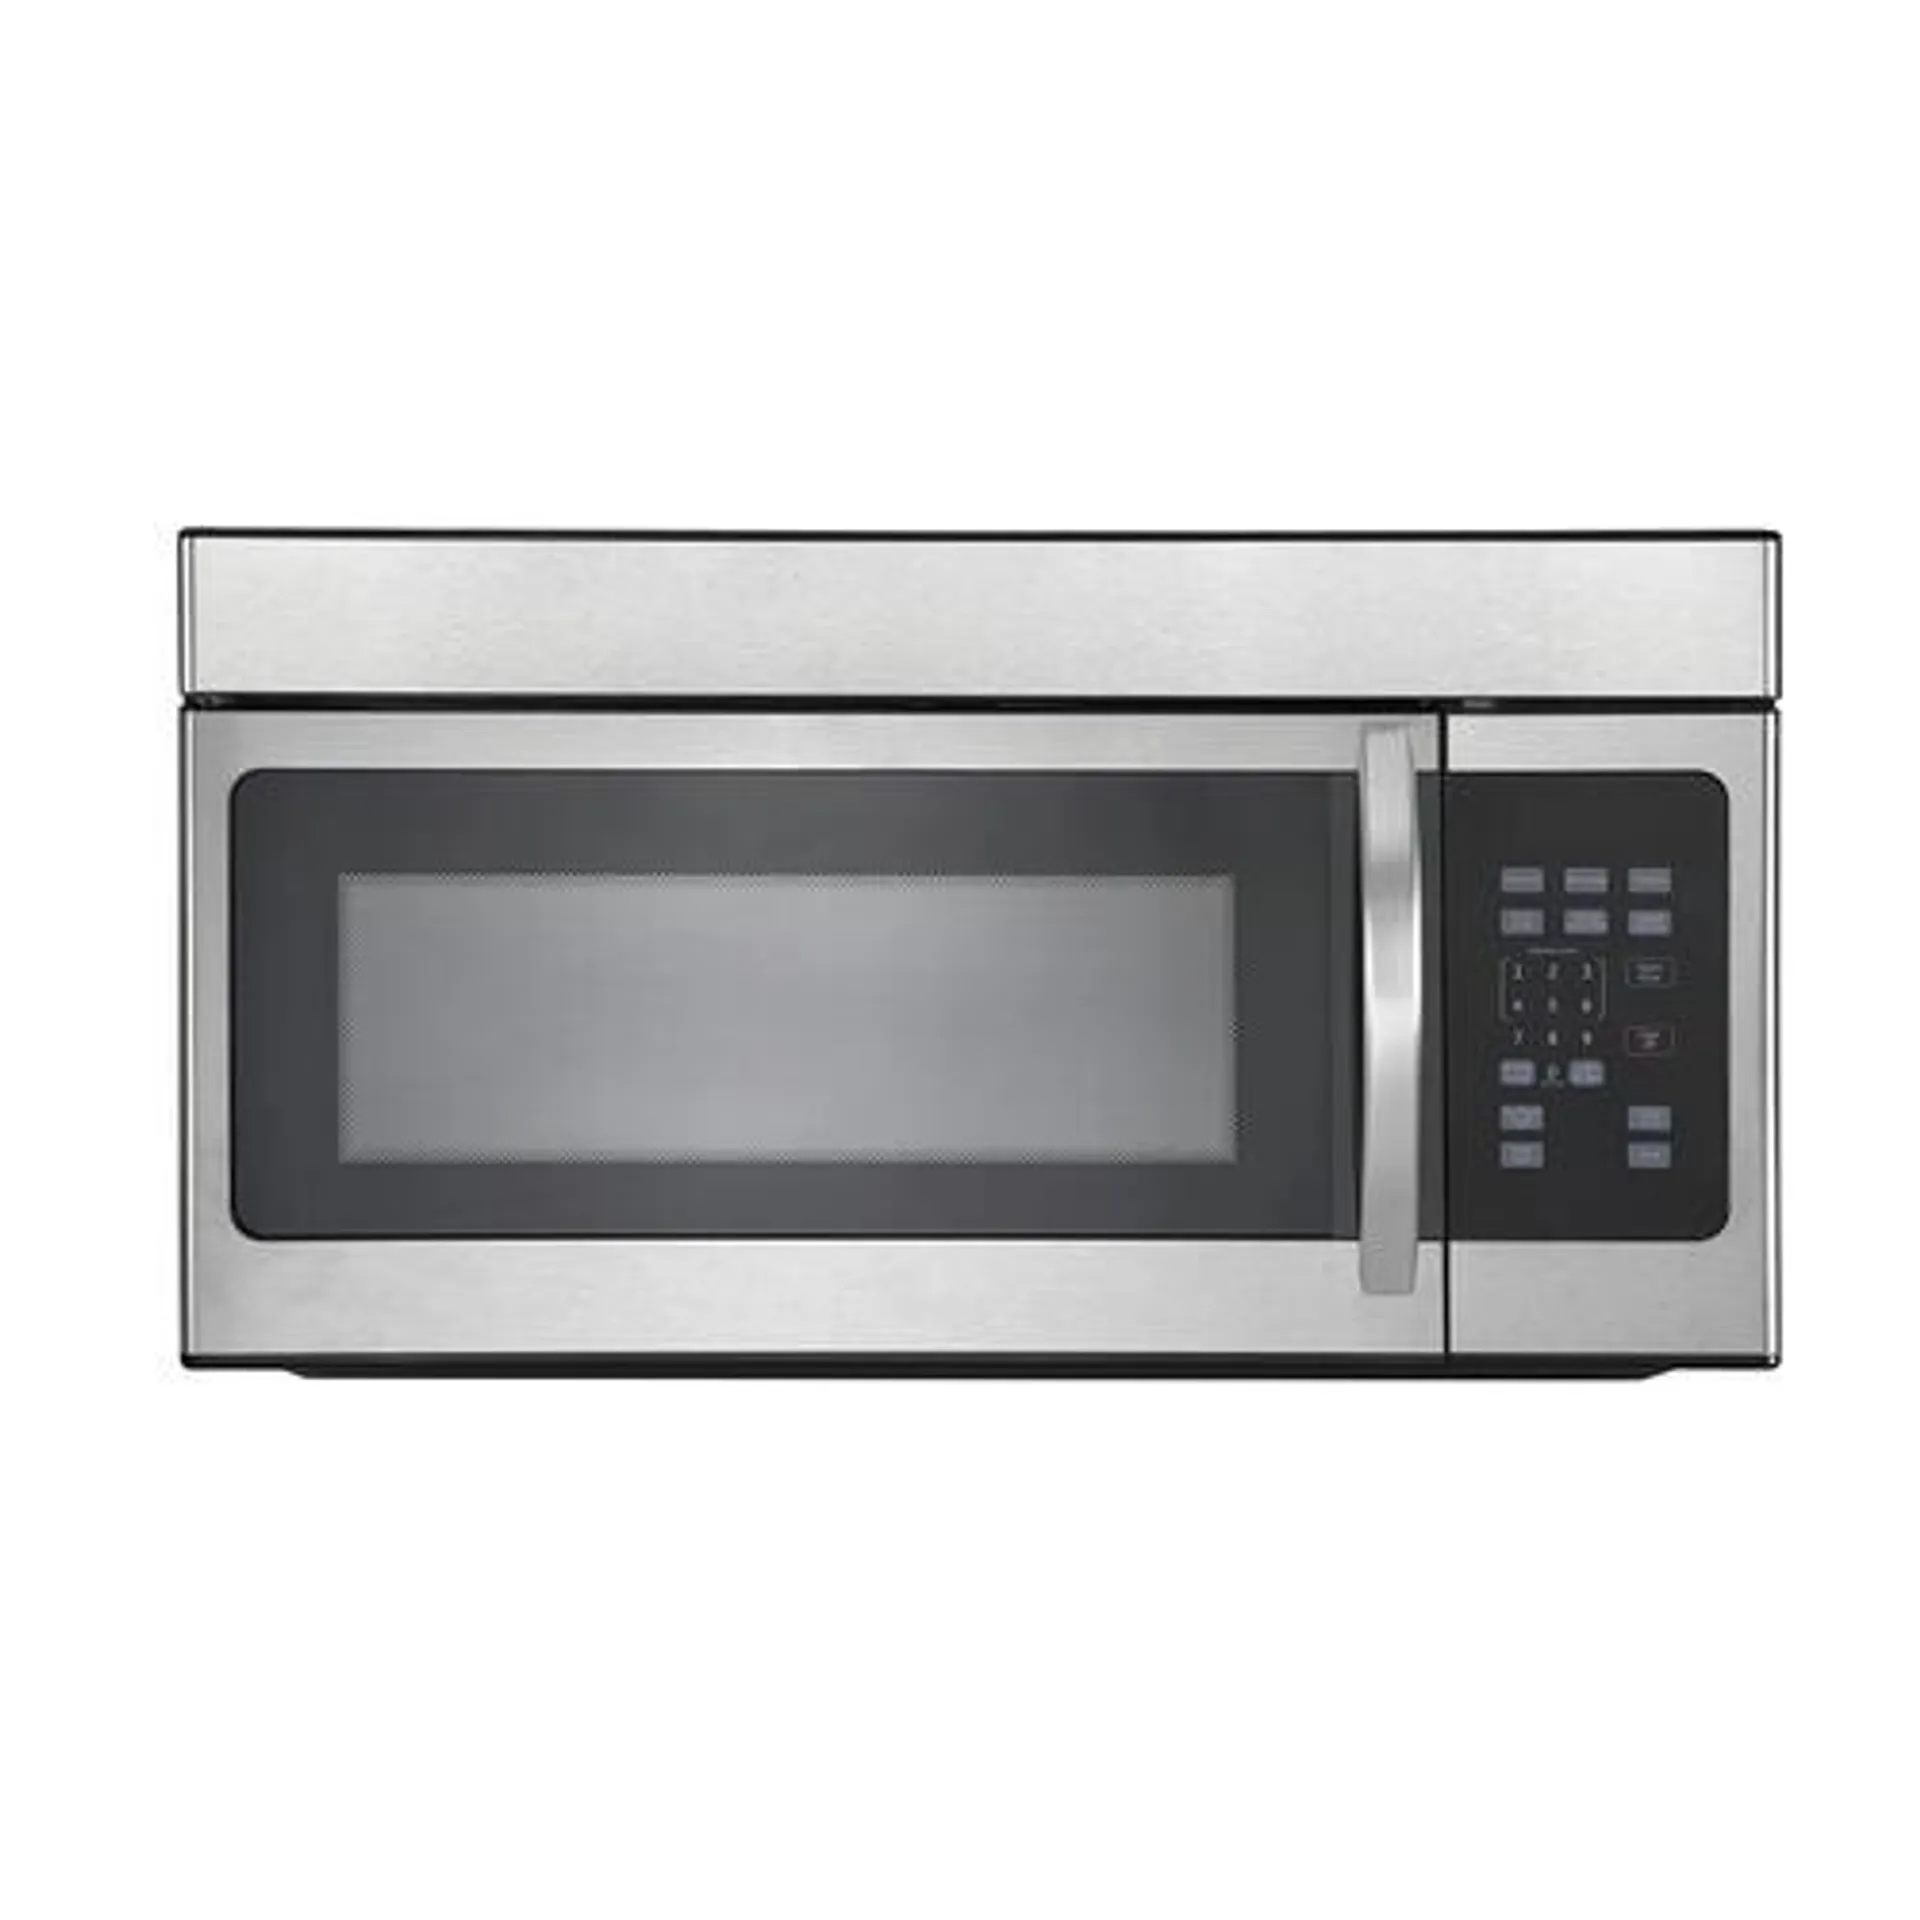 Criterion® 1.6 cu. ft. Stainless Steel Over-the-Range Microwave